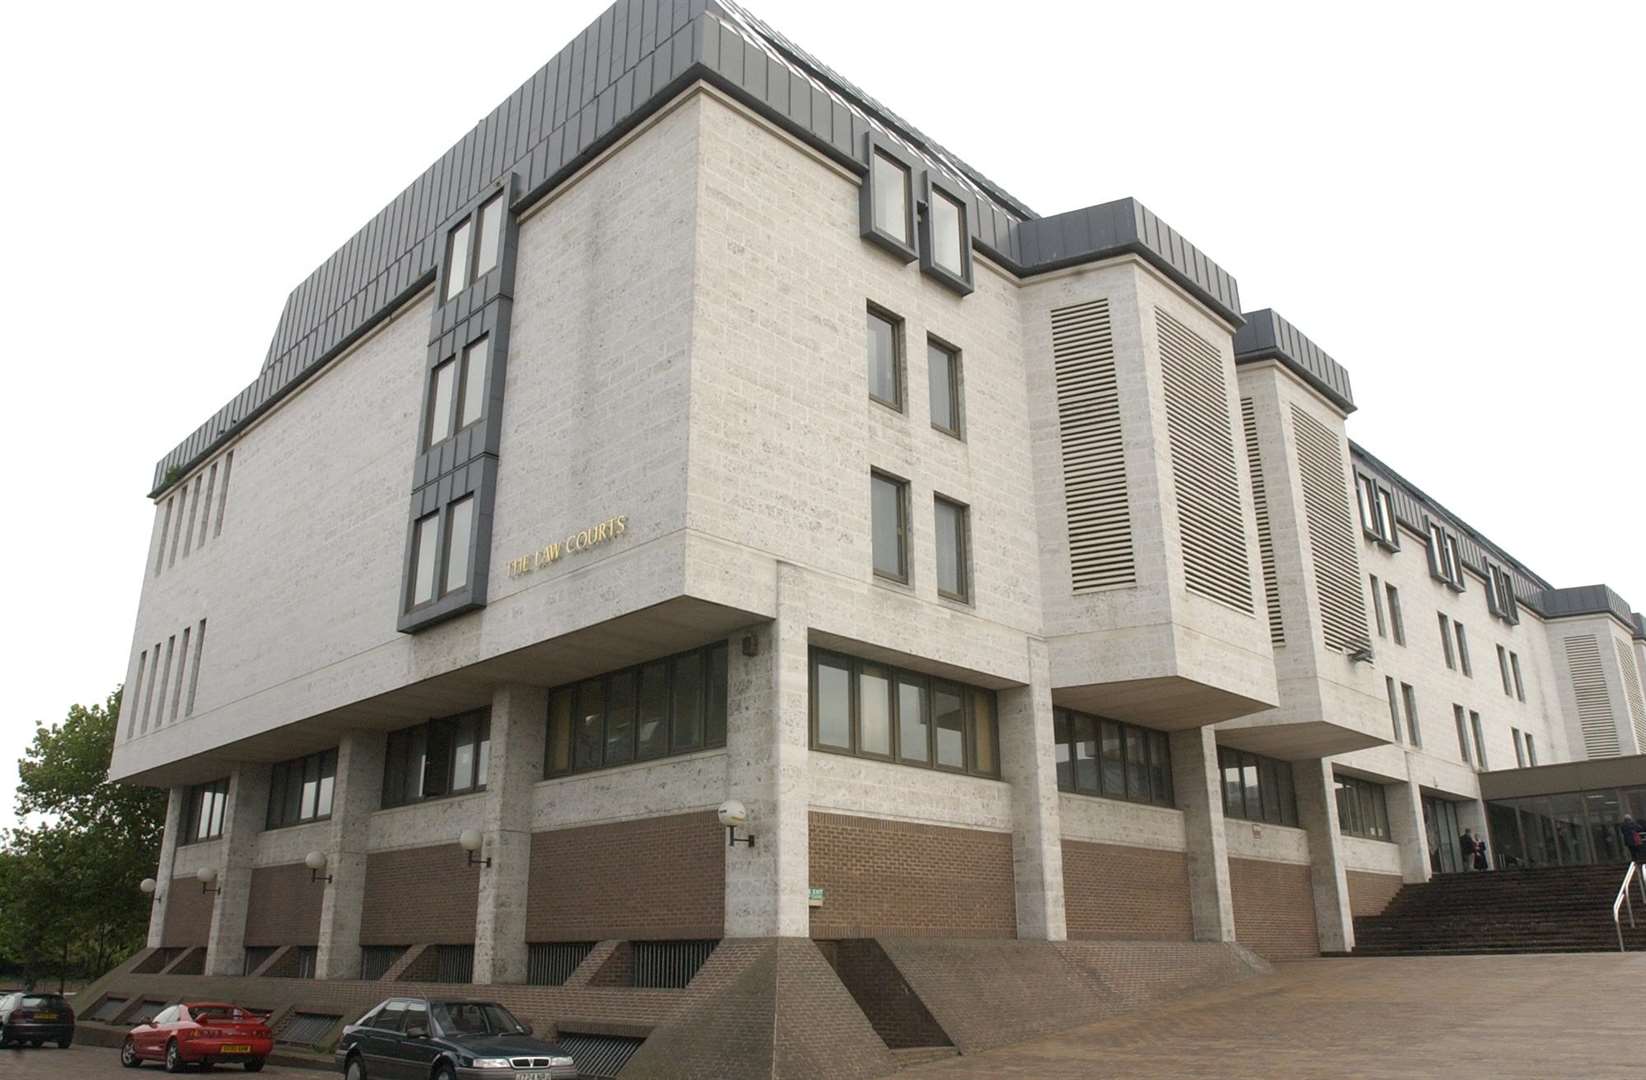 Picture of Maidstone Crown Court for stock. Provider: Stock (2817119)